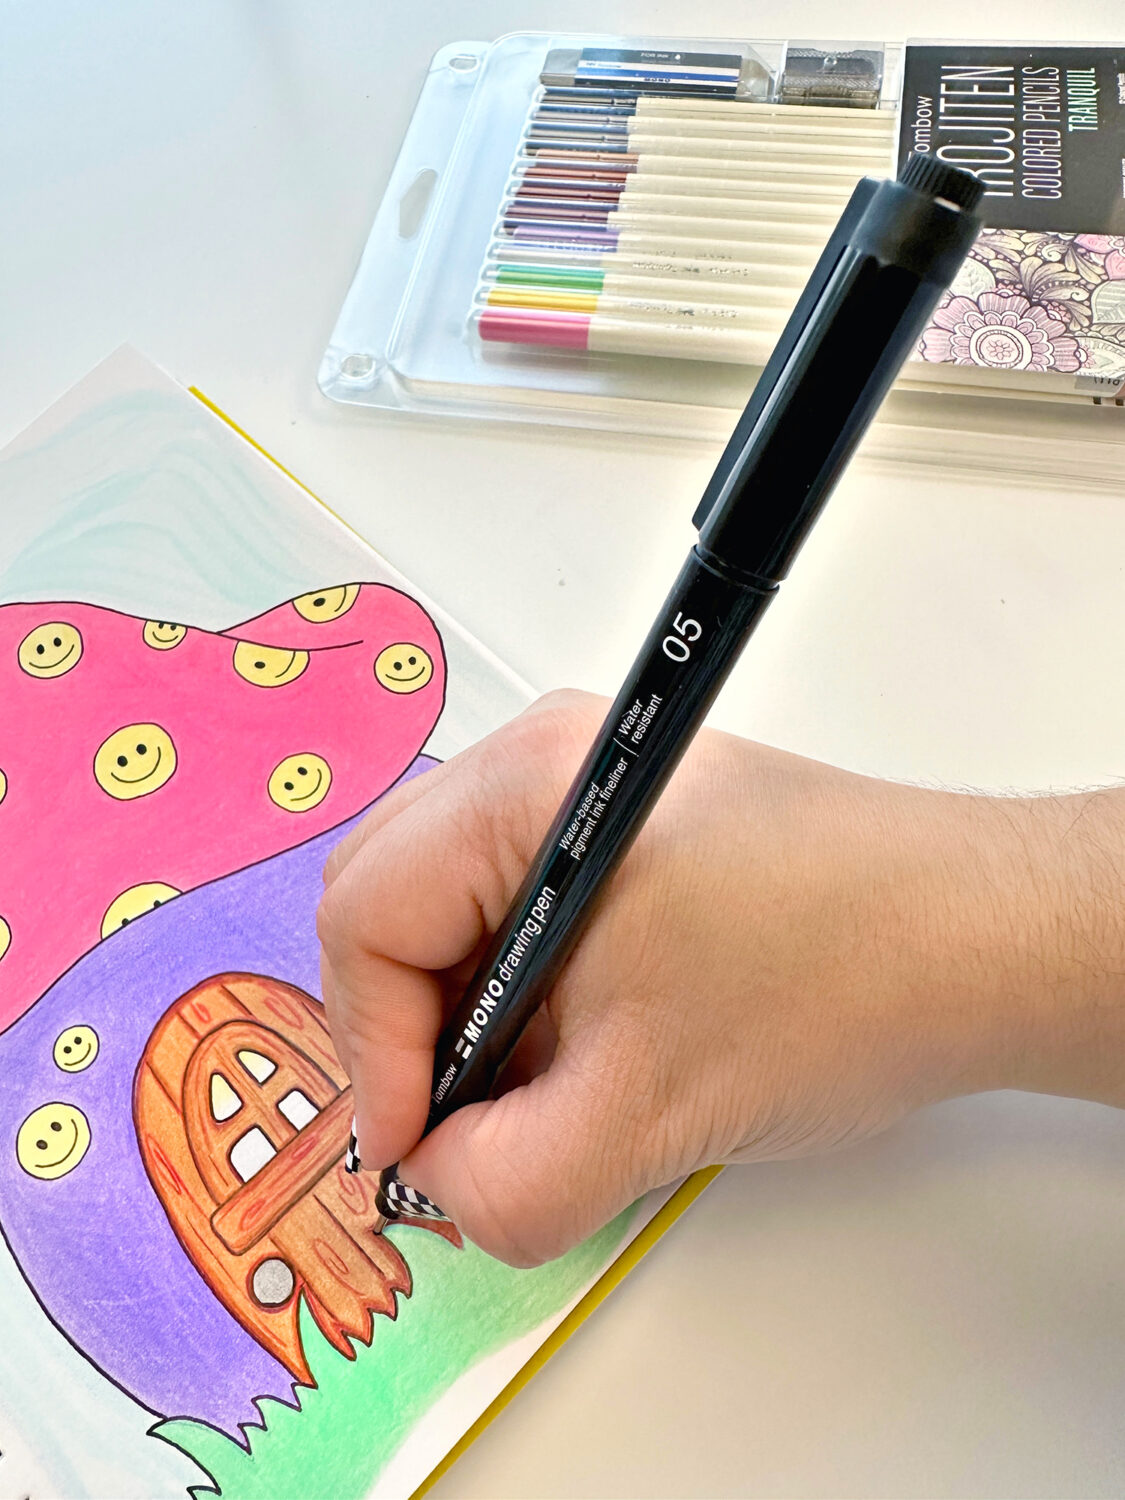 Use Tombow MONO Drawing Pens to clean up your image and add extra details! #tombow #artjournaling